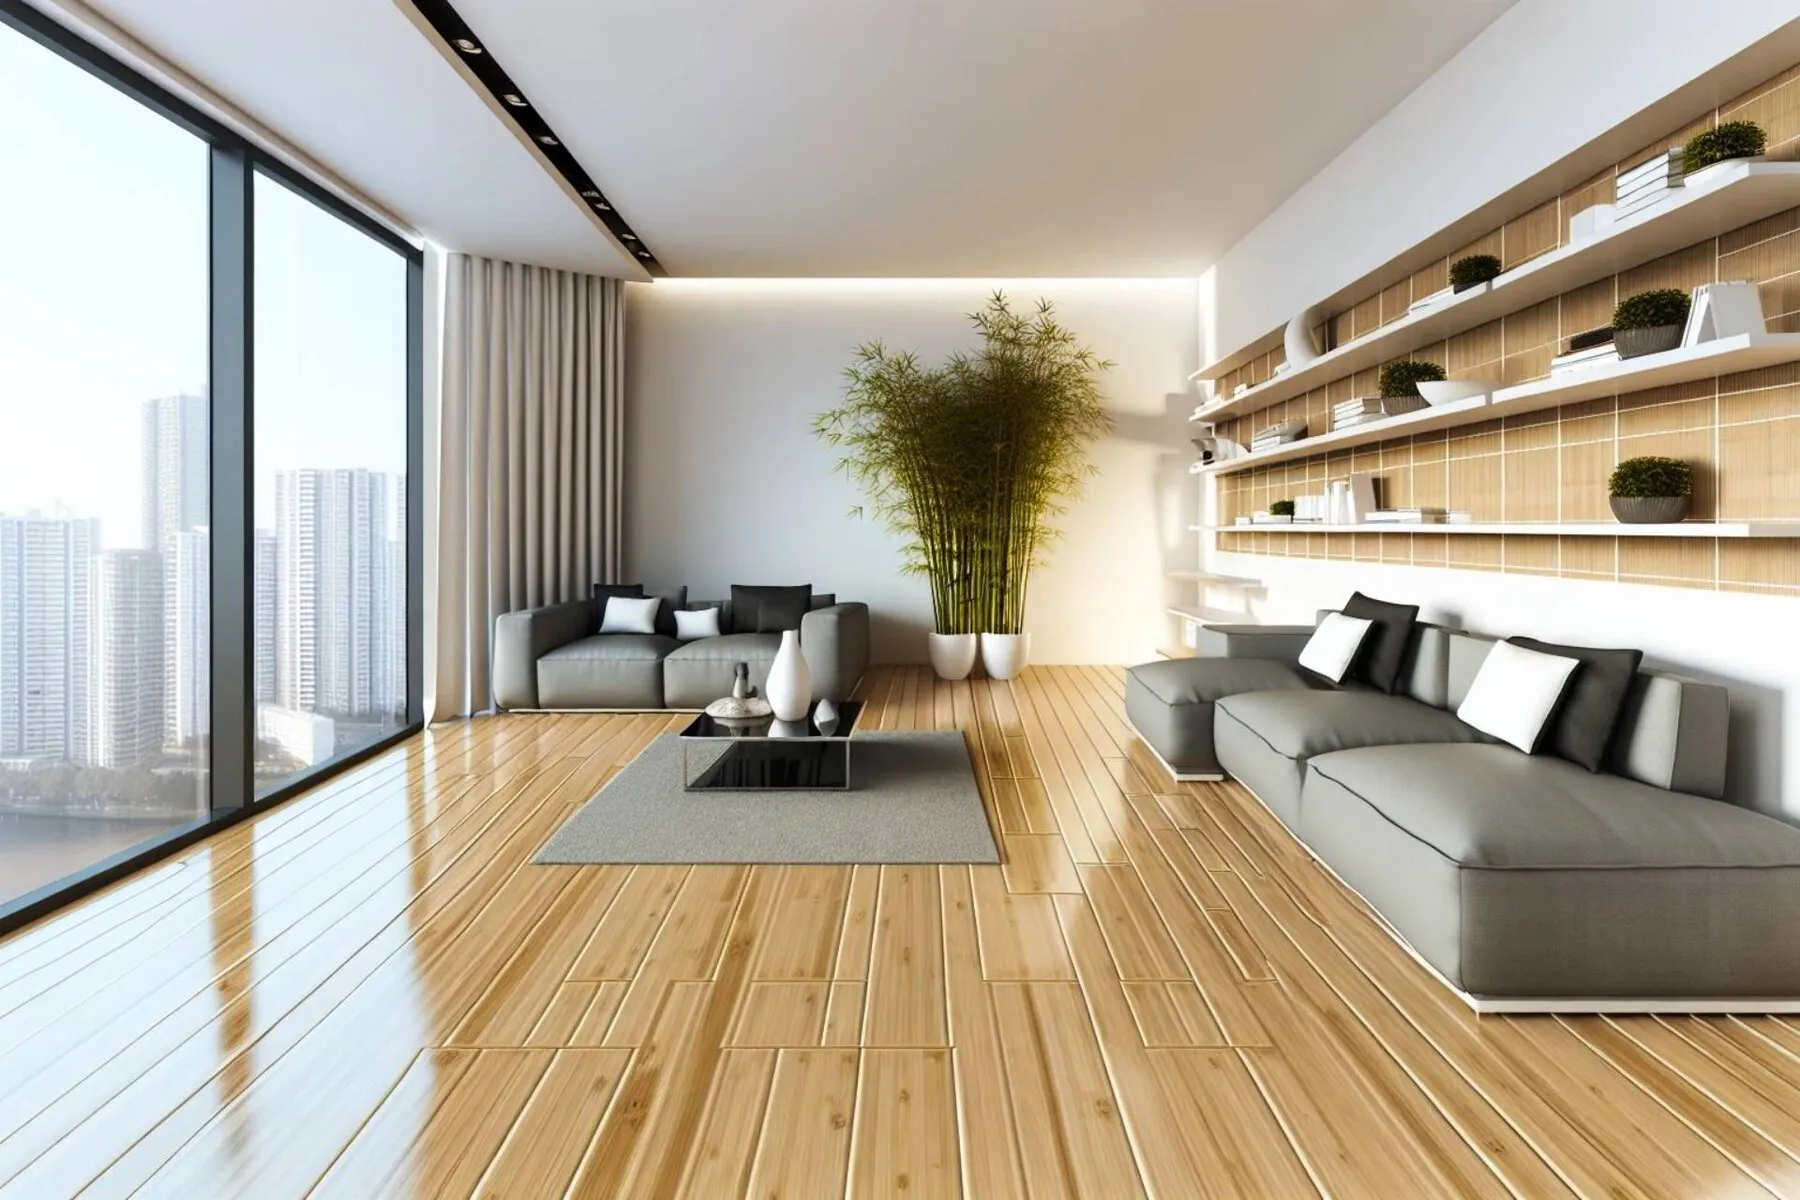 Photo of a modern living room with bamboo flooring